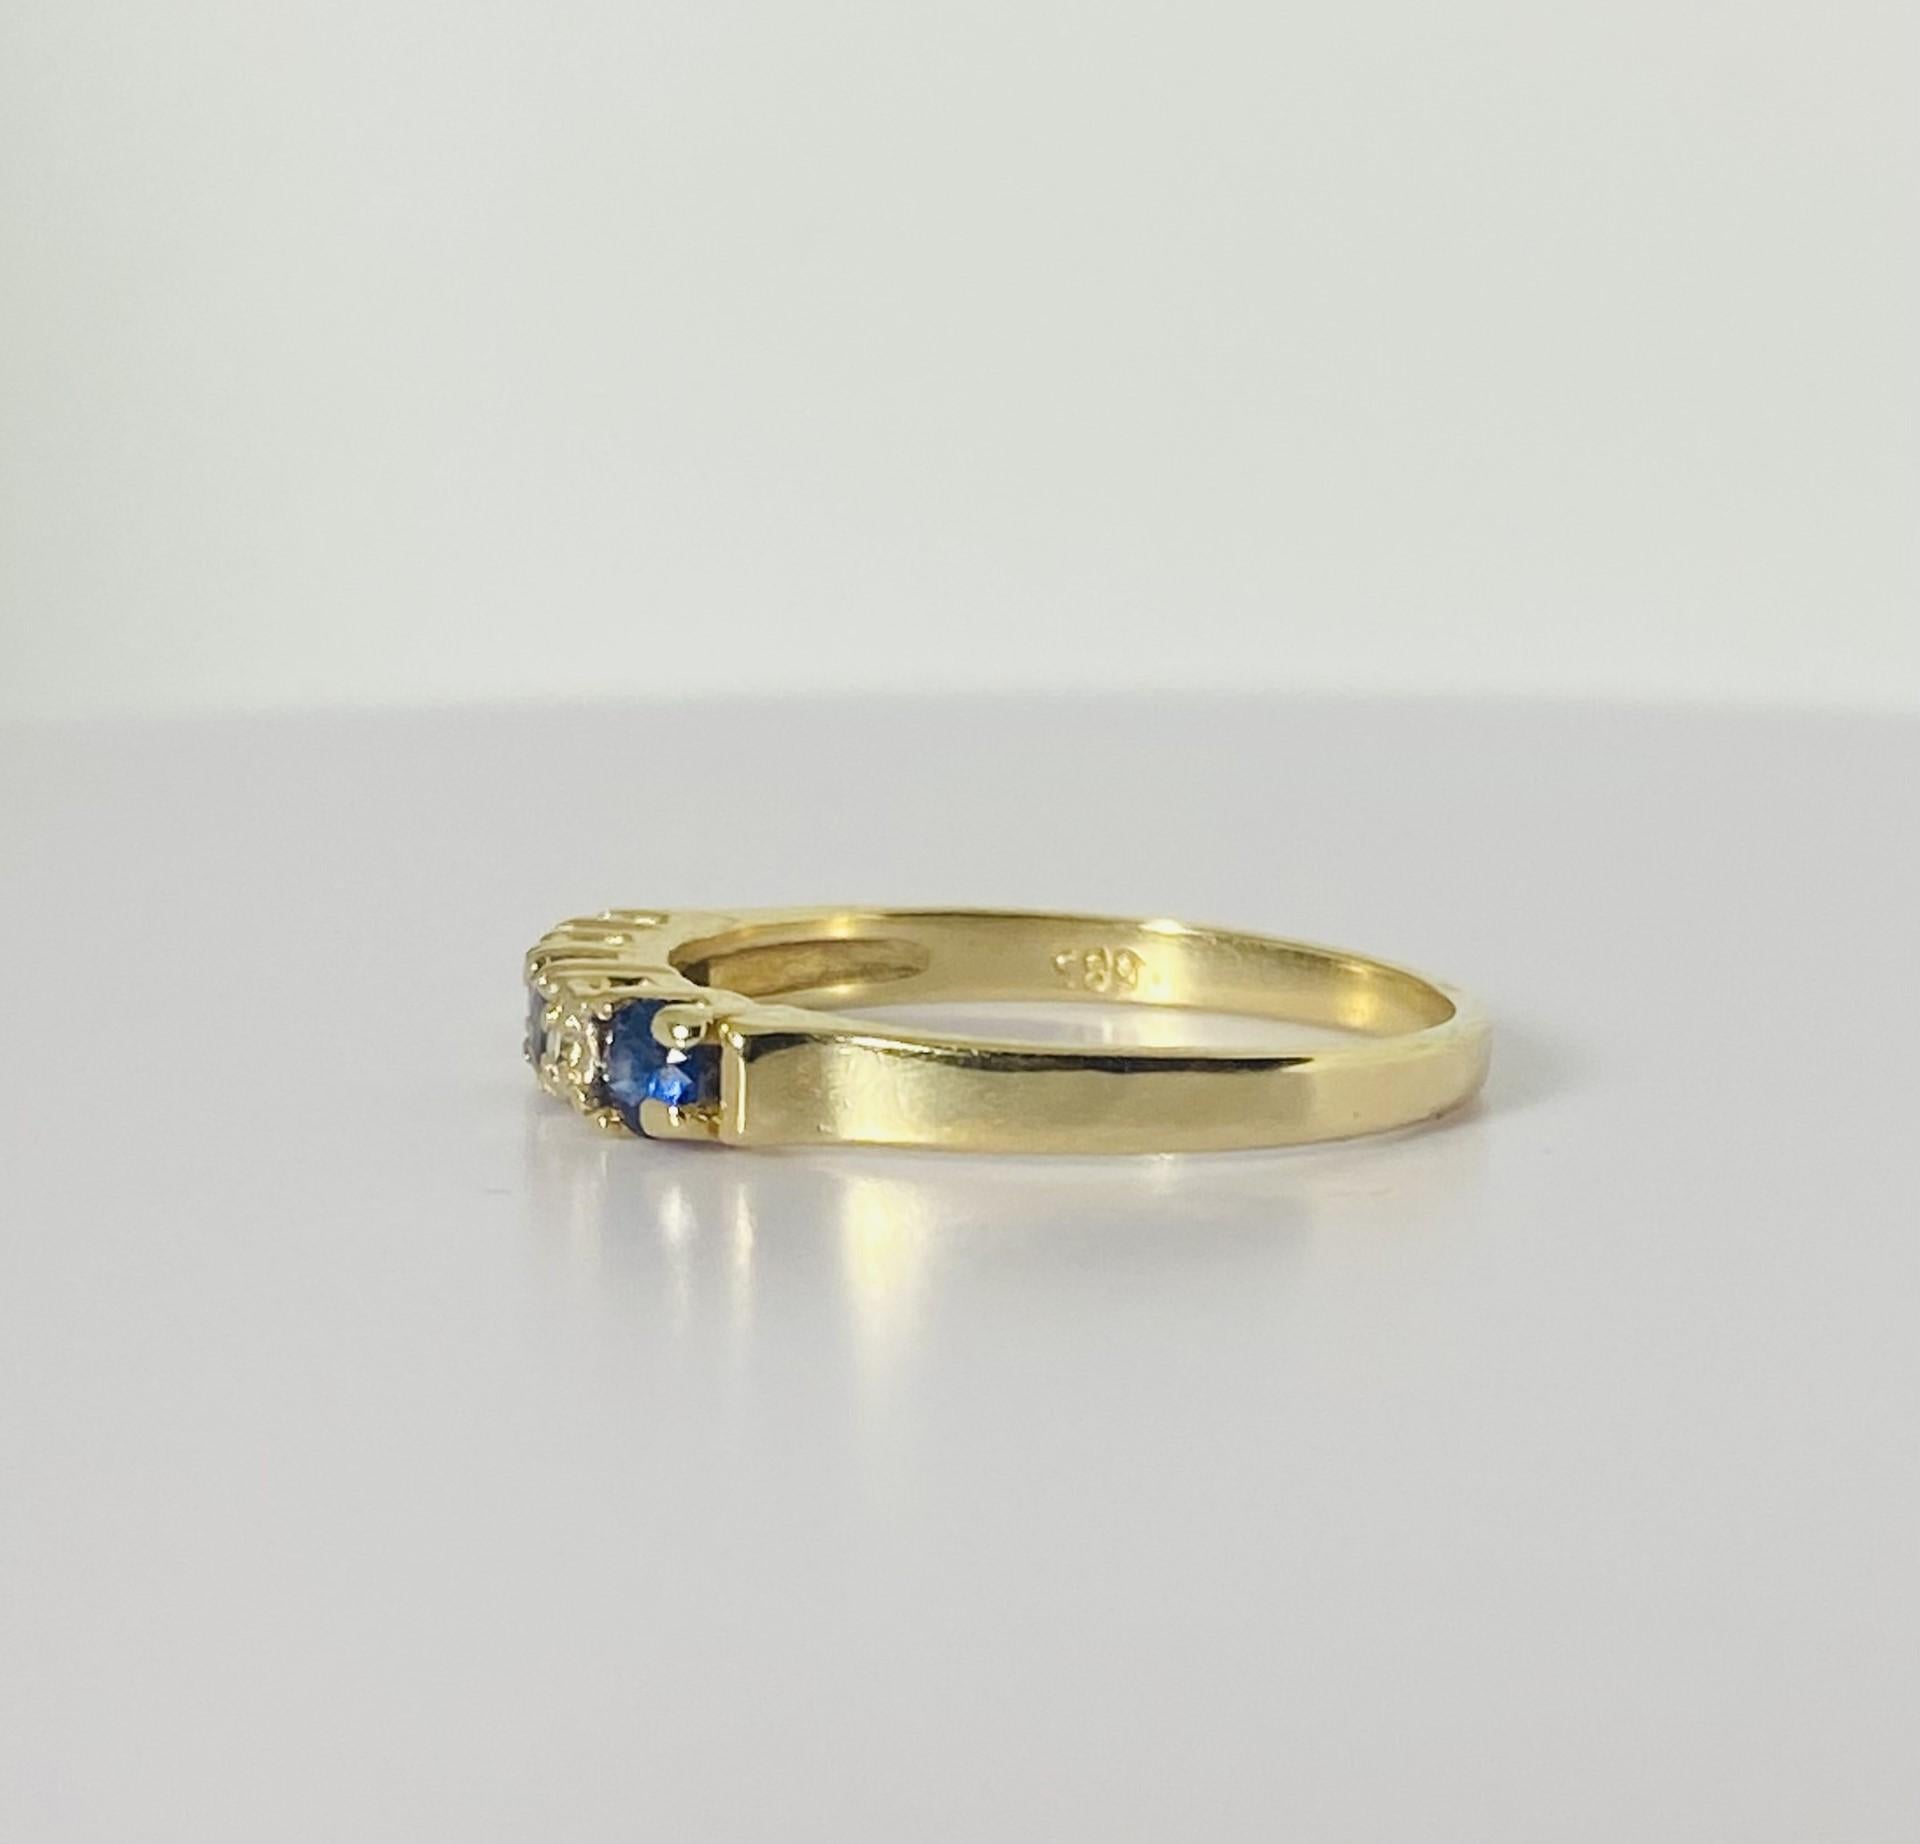 Rose Cut Vintage ring with blue sapphires & diamonds from the 1950S, 14 carat yellow gold